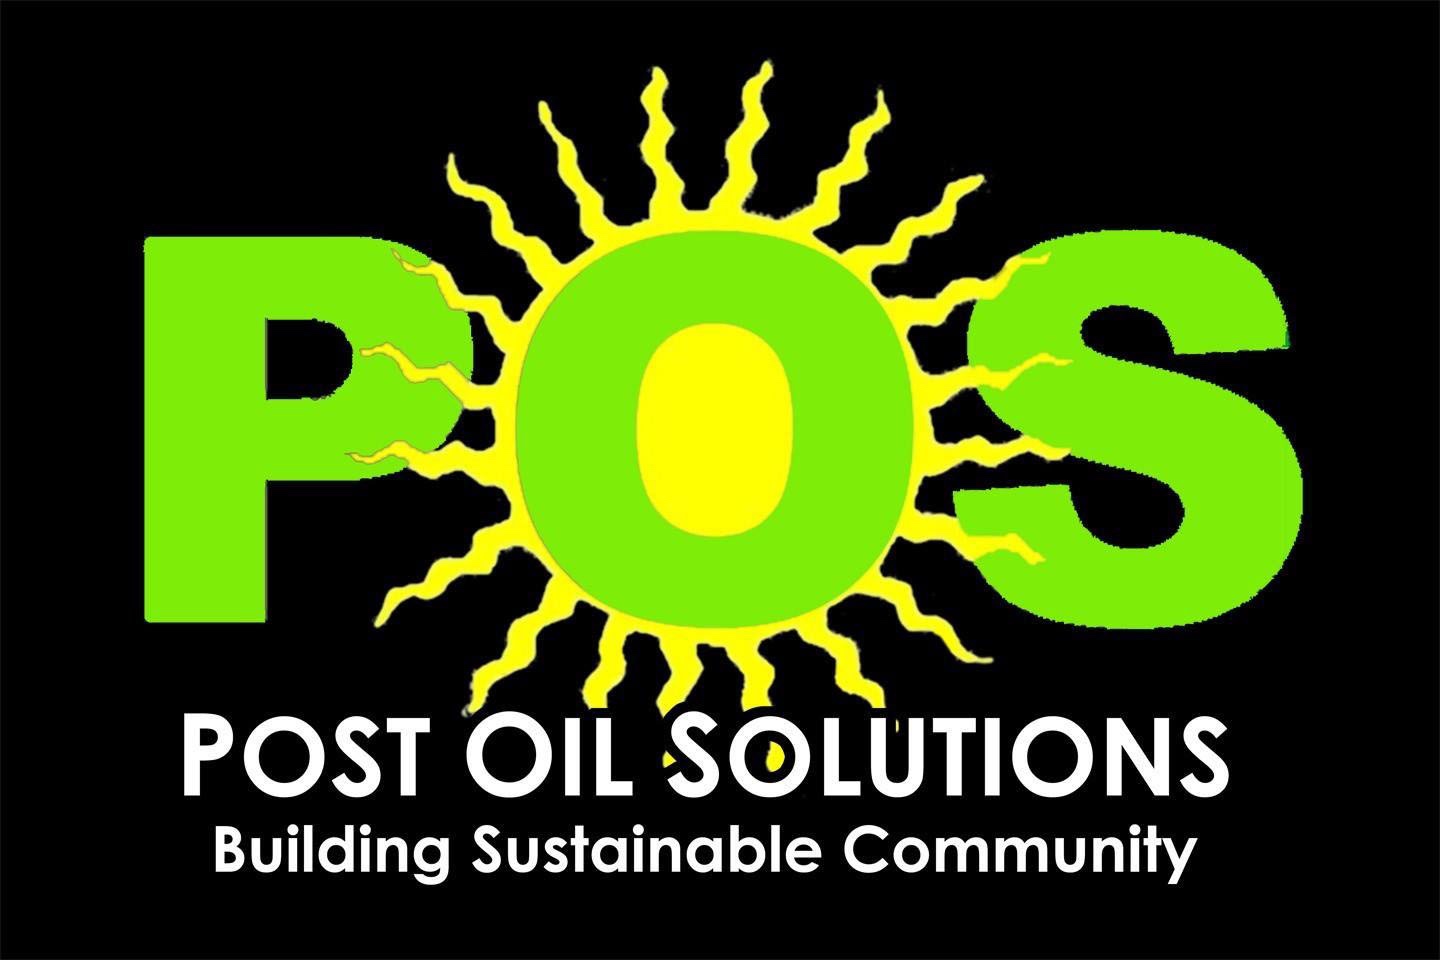 Post Oil Solutions